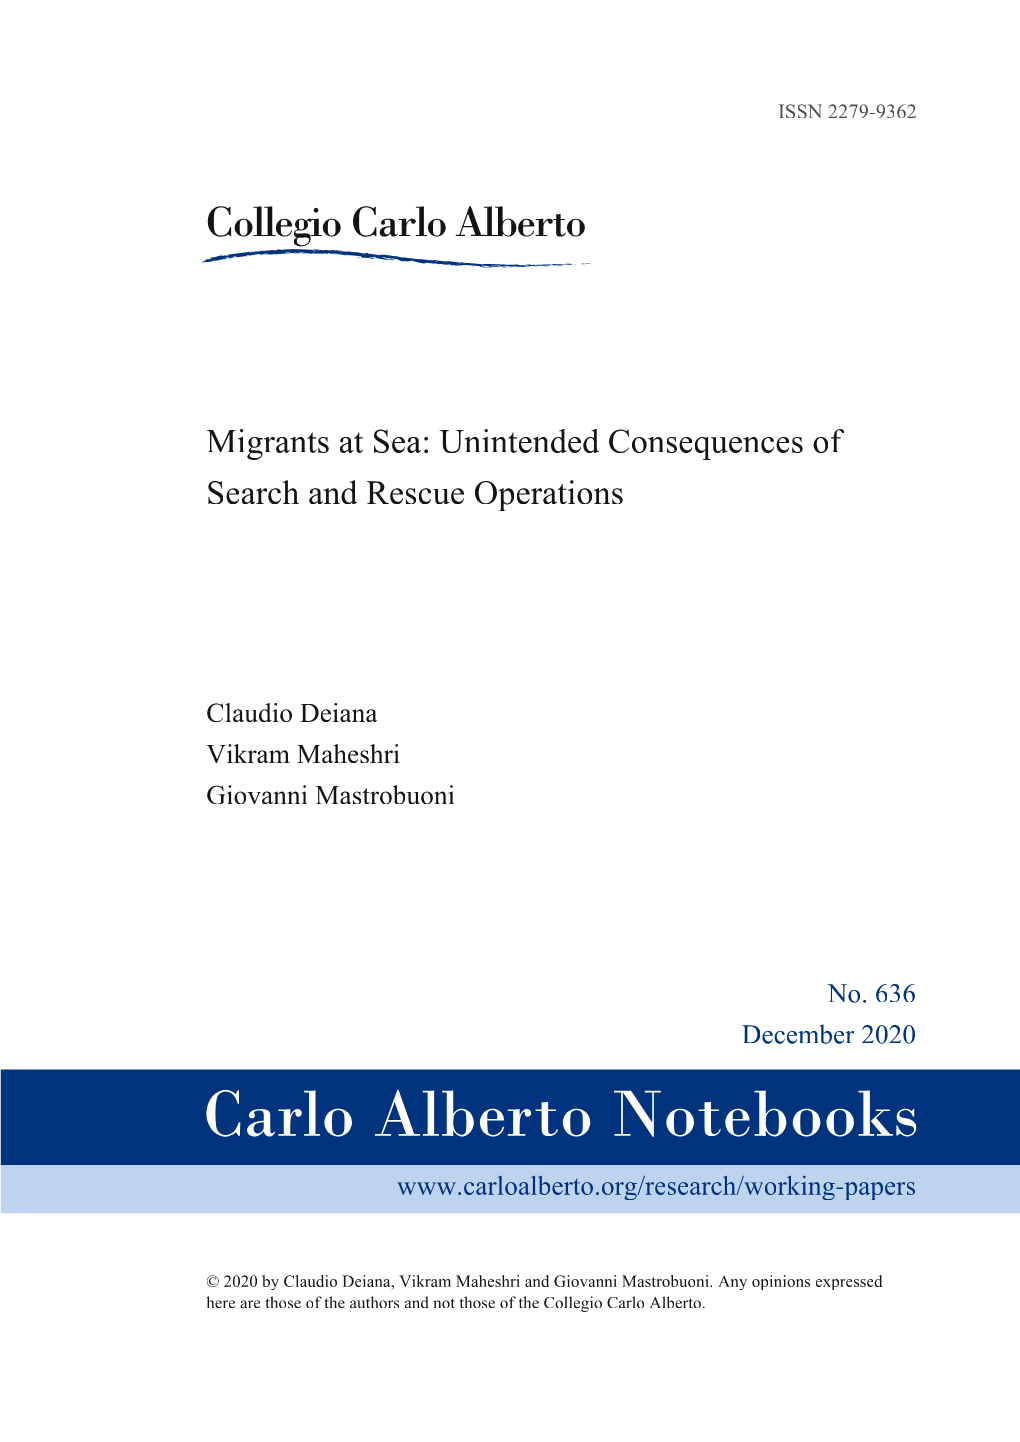 Migrants at Sea: Unintended Consequences of Search and Rescue Operations*